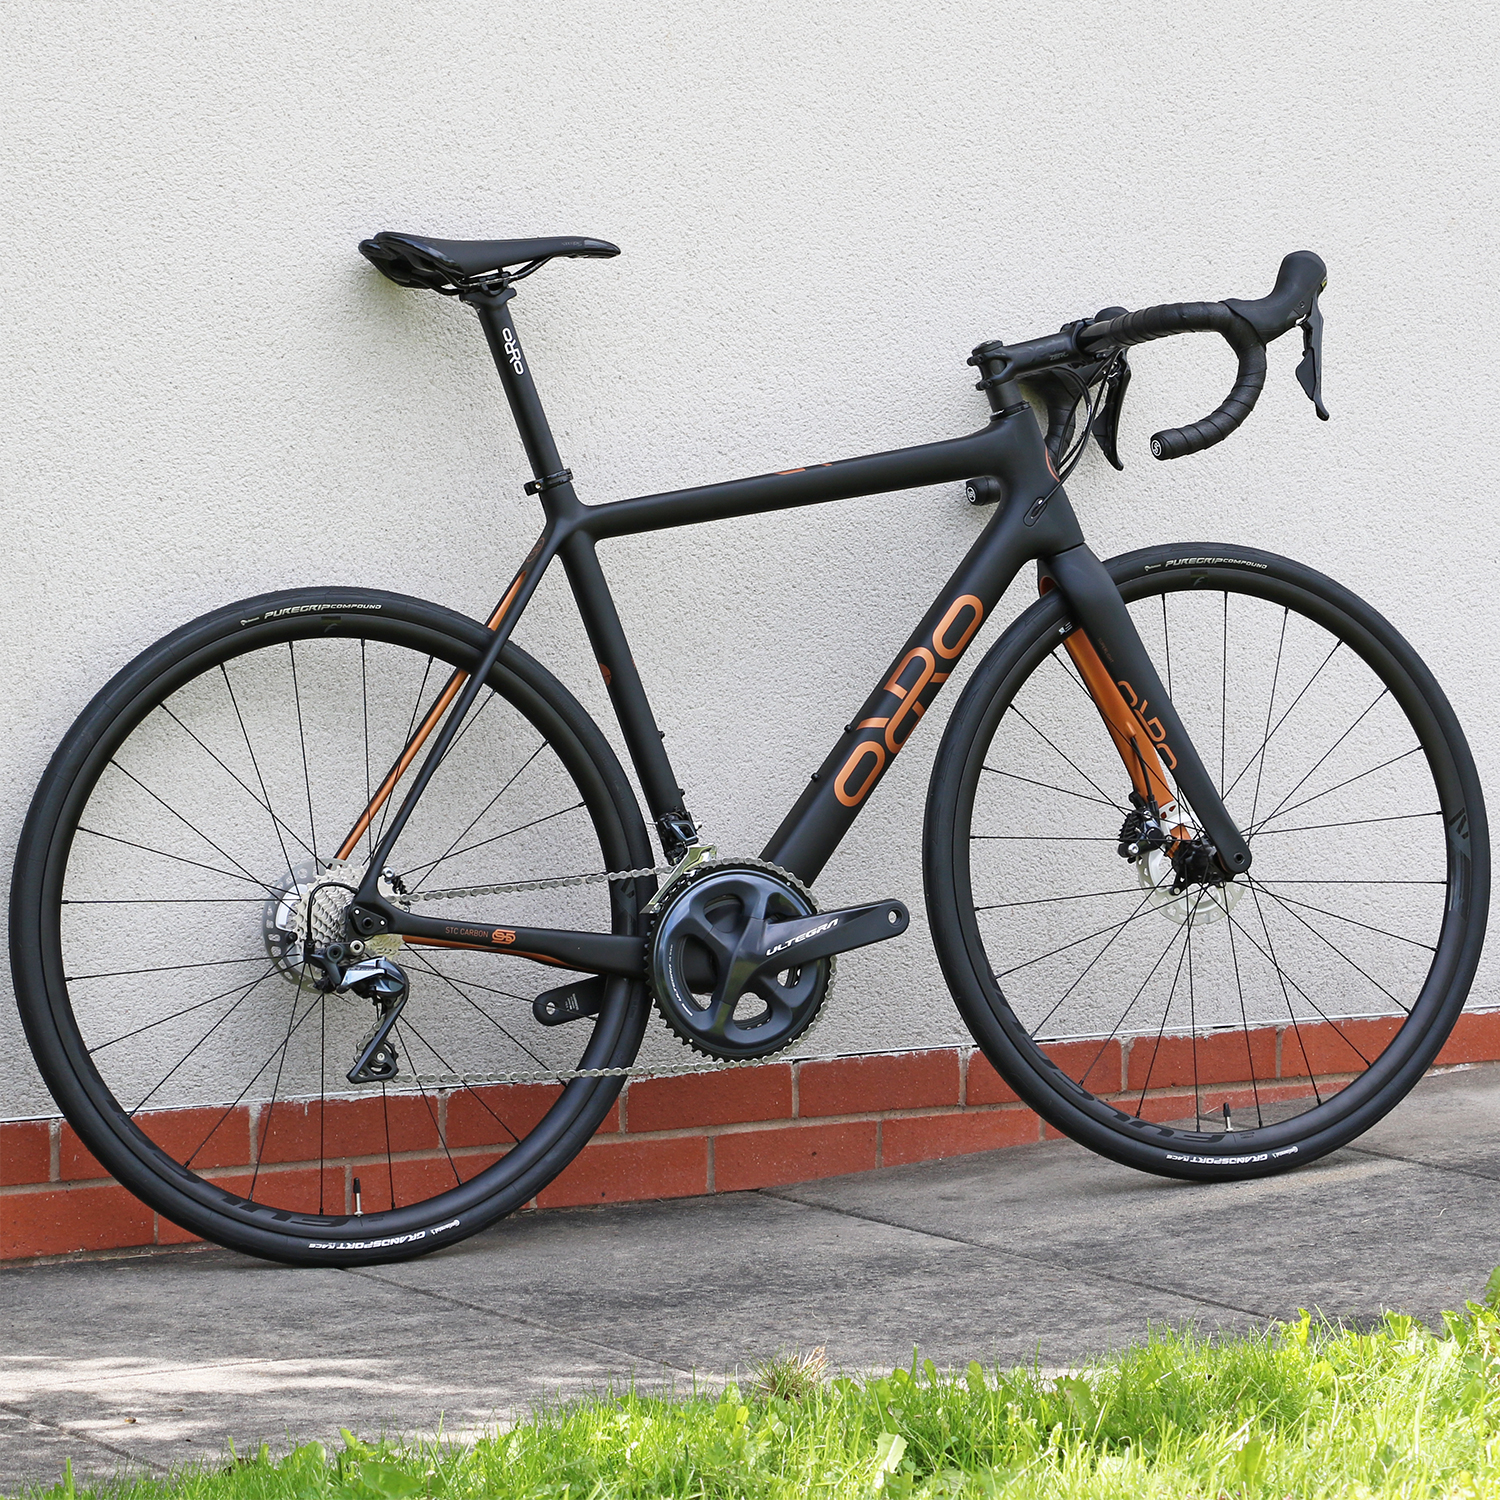 Orro Gold STC Ultegra Carbon Road Bike - Limited Edition | Merlin Cycles